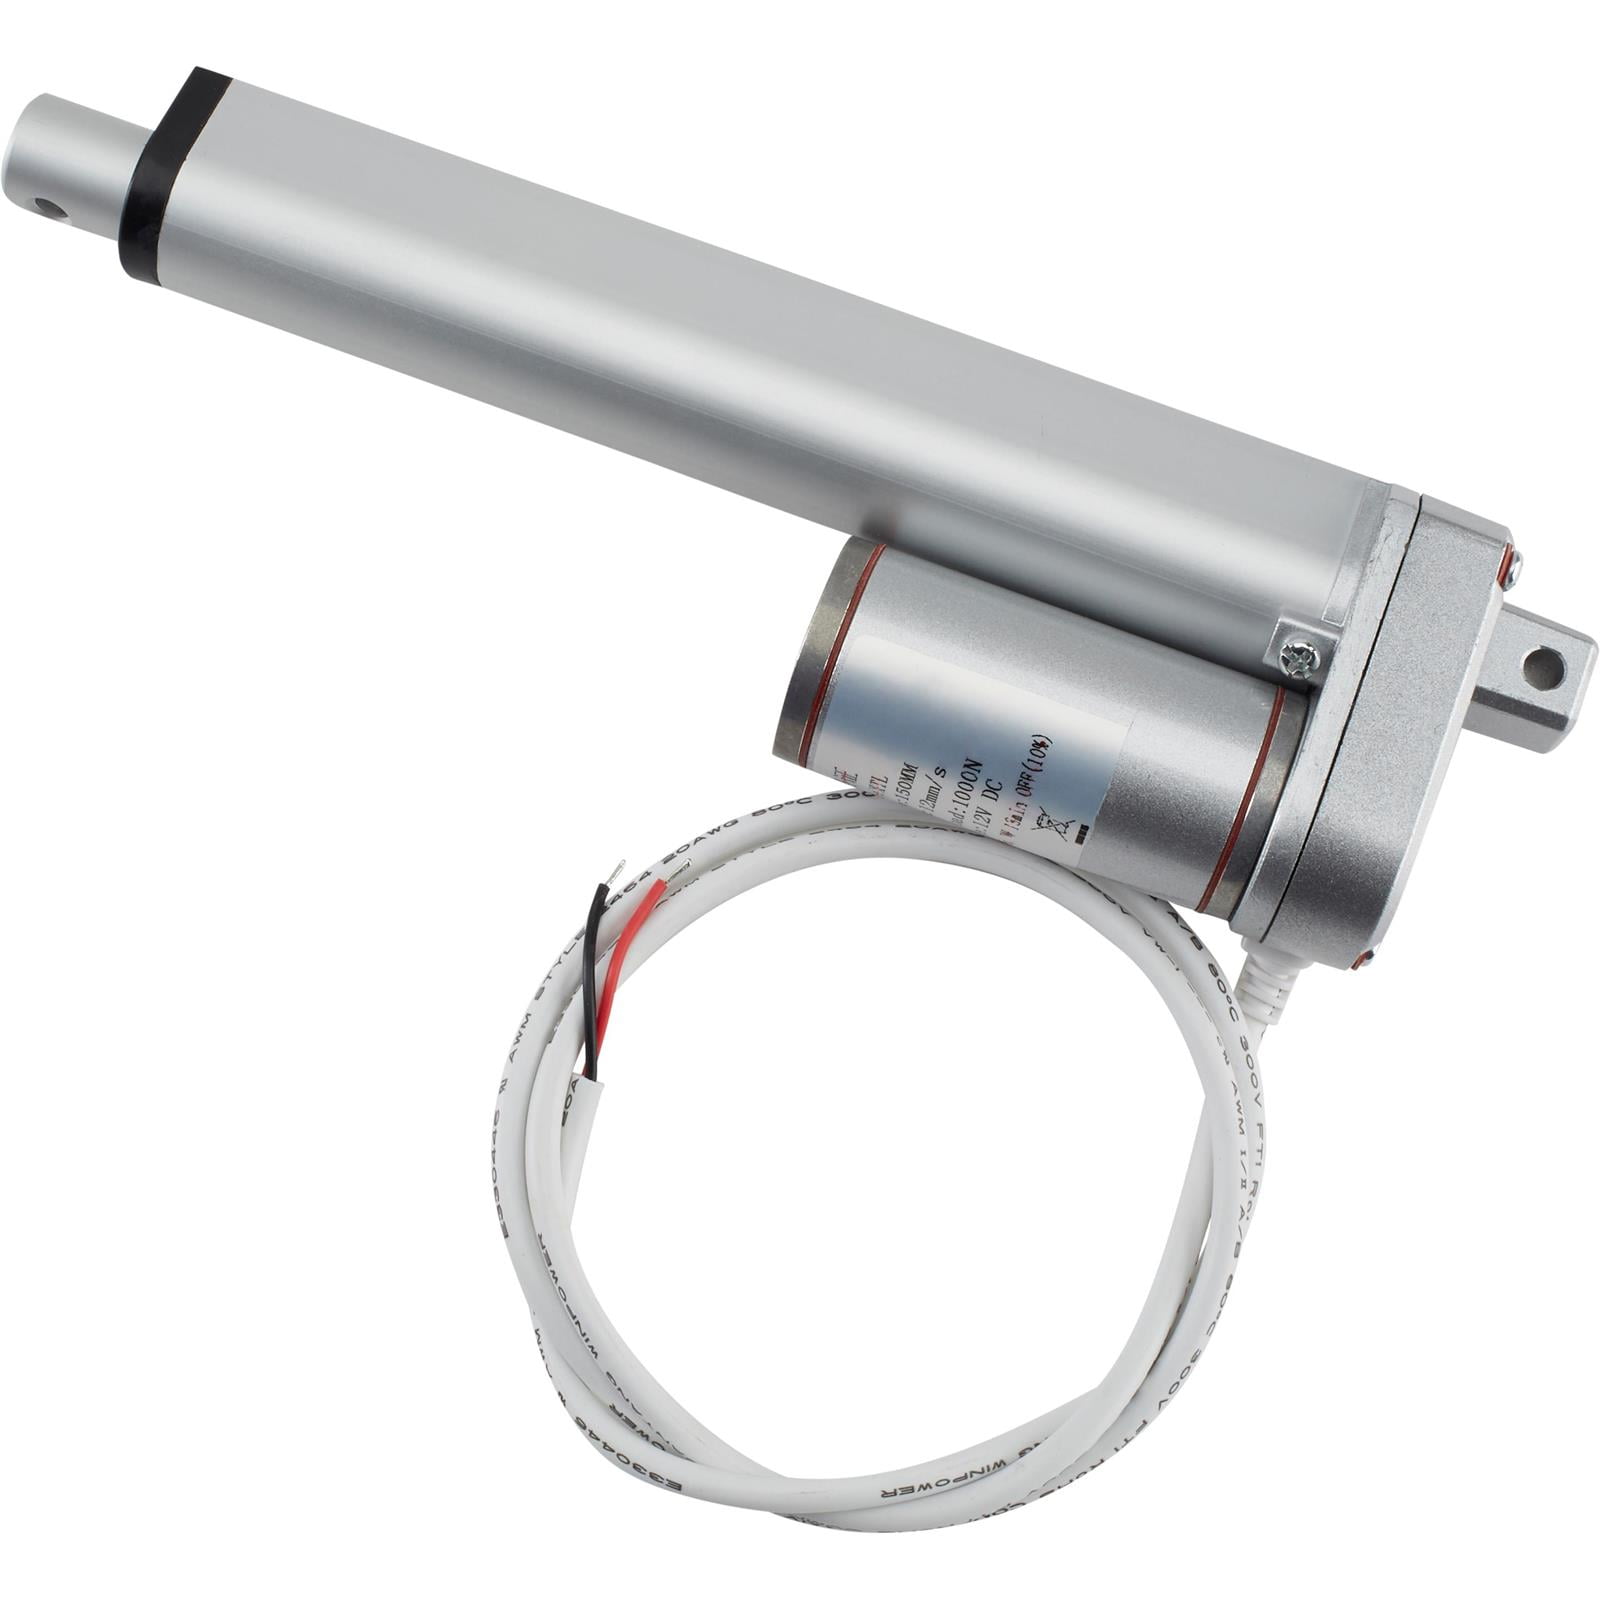 Details about  / Heavy Duty 8/" Linear Actuator W// Wireless Control Kit 12V Motor for Car Boat EL